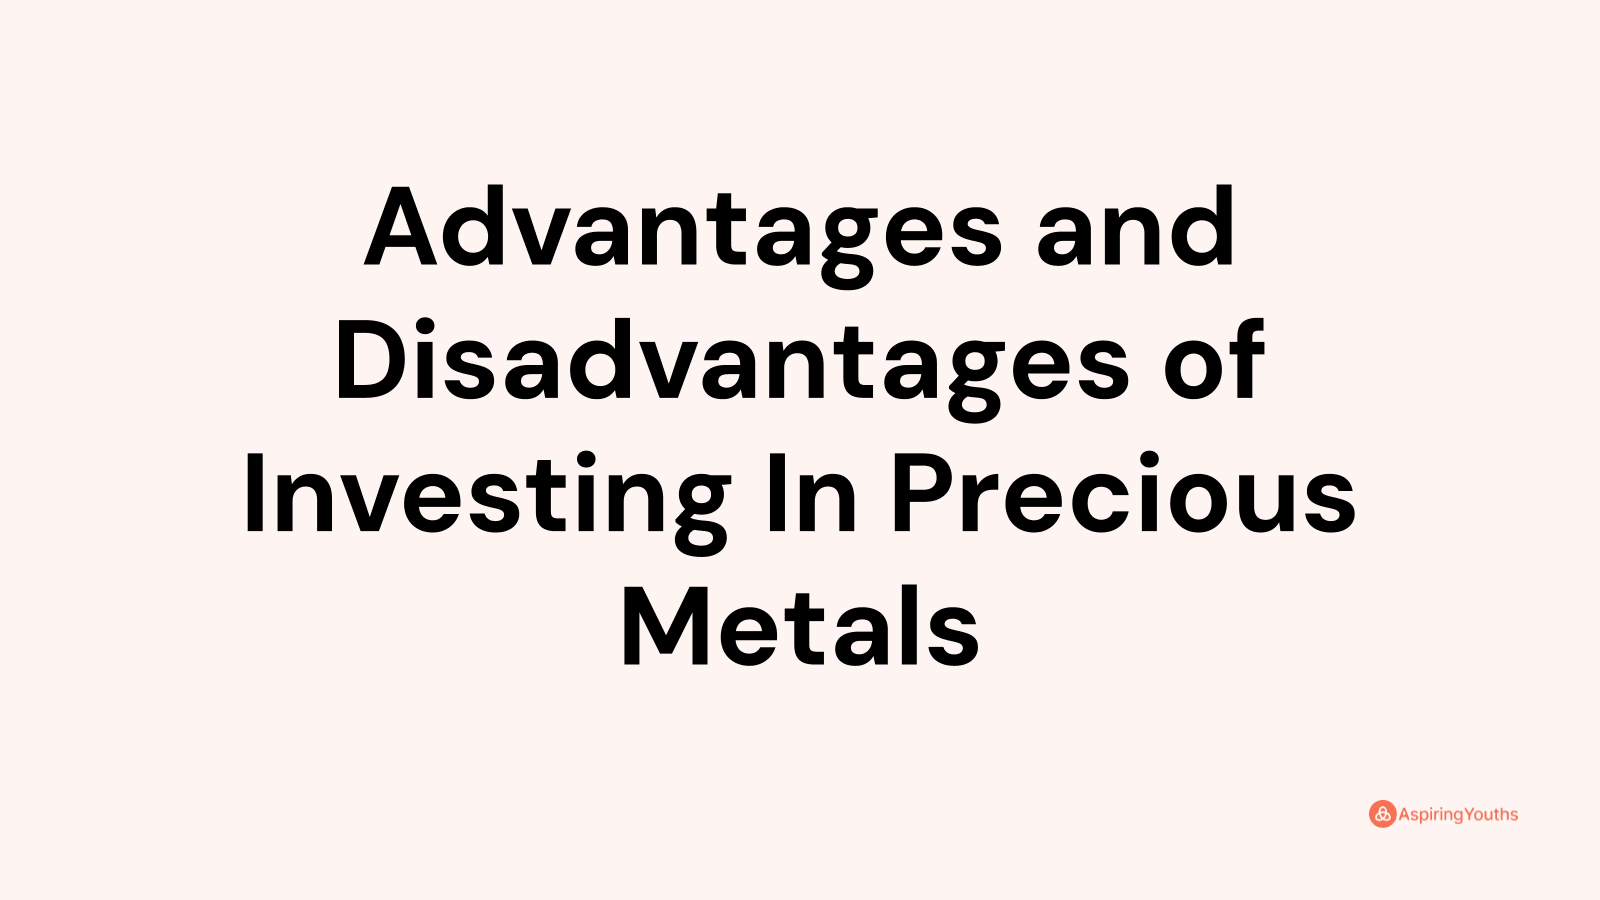 Advantages and disadvantages of Investing In Precious Metals